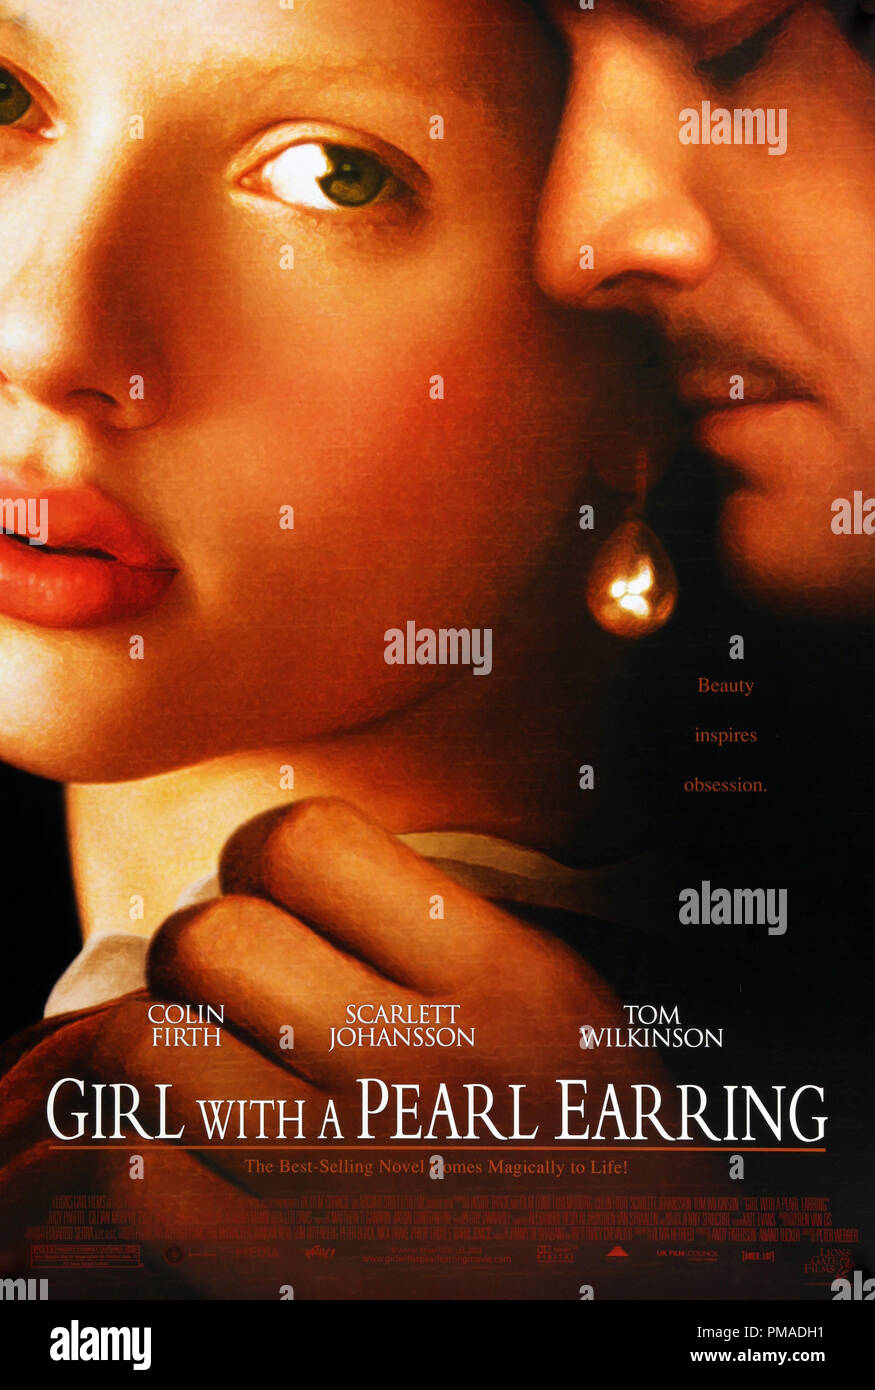 'The Girl With a Pearl Earring' - US Poster 2003 Lions Gate Films  Scarlett Johansson, Colin Firth  File Reference # 32509 171THA Stock Photo